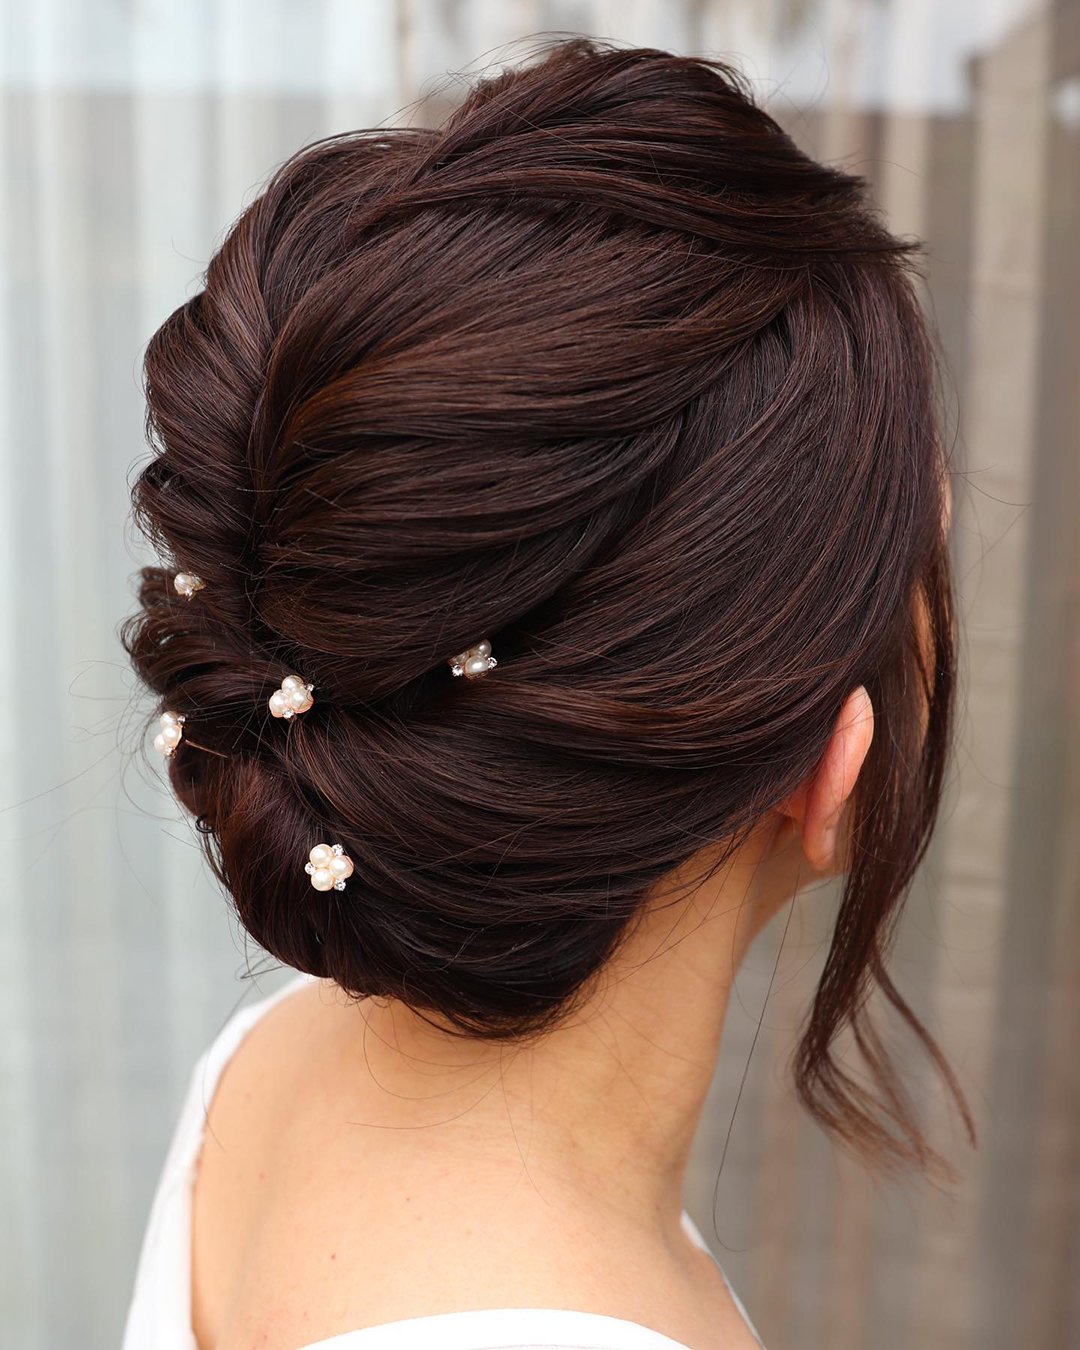 wedding updos for short hair textured smooth updo _vanessaospina_